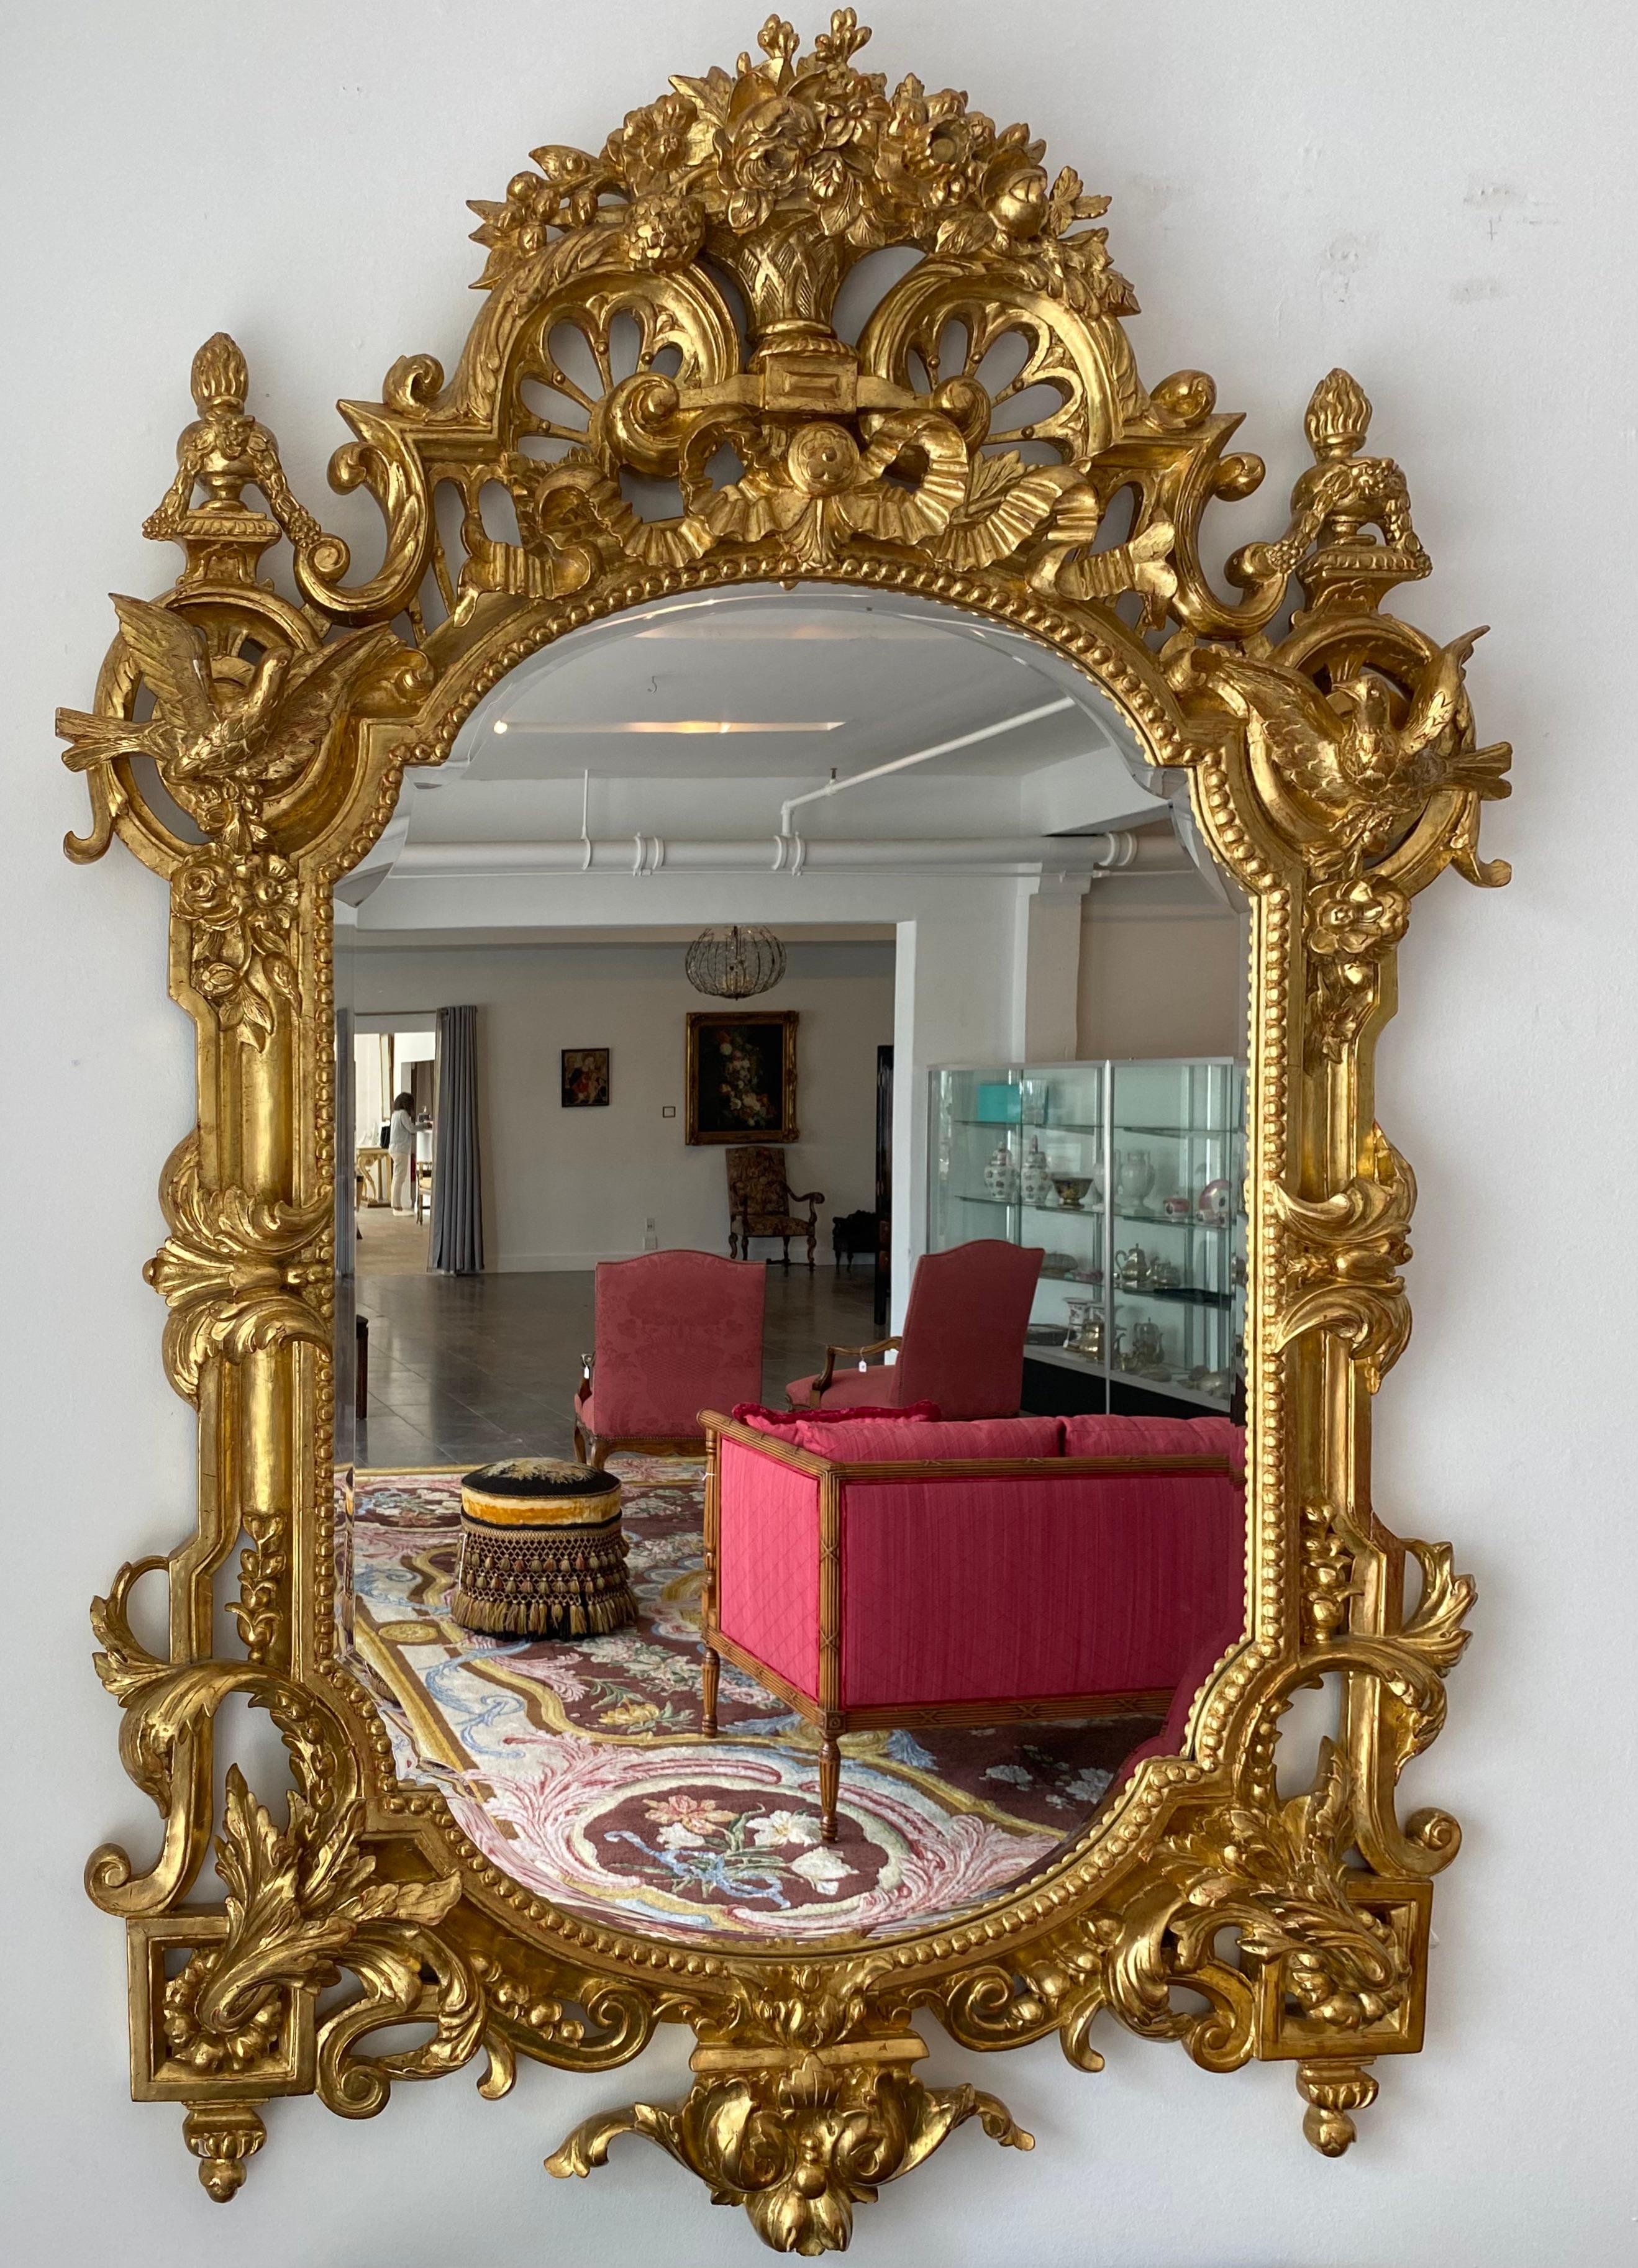 A fine and very generously sized French Régence giltwood mirror featuring vases, birds cresting with extraordinary hand-carved elements.

An early 20th century French Régence giltwood mirror reminiscent of 18th Century palatial console or wall